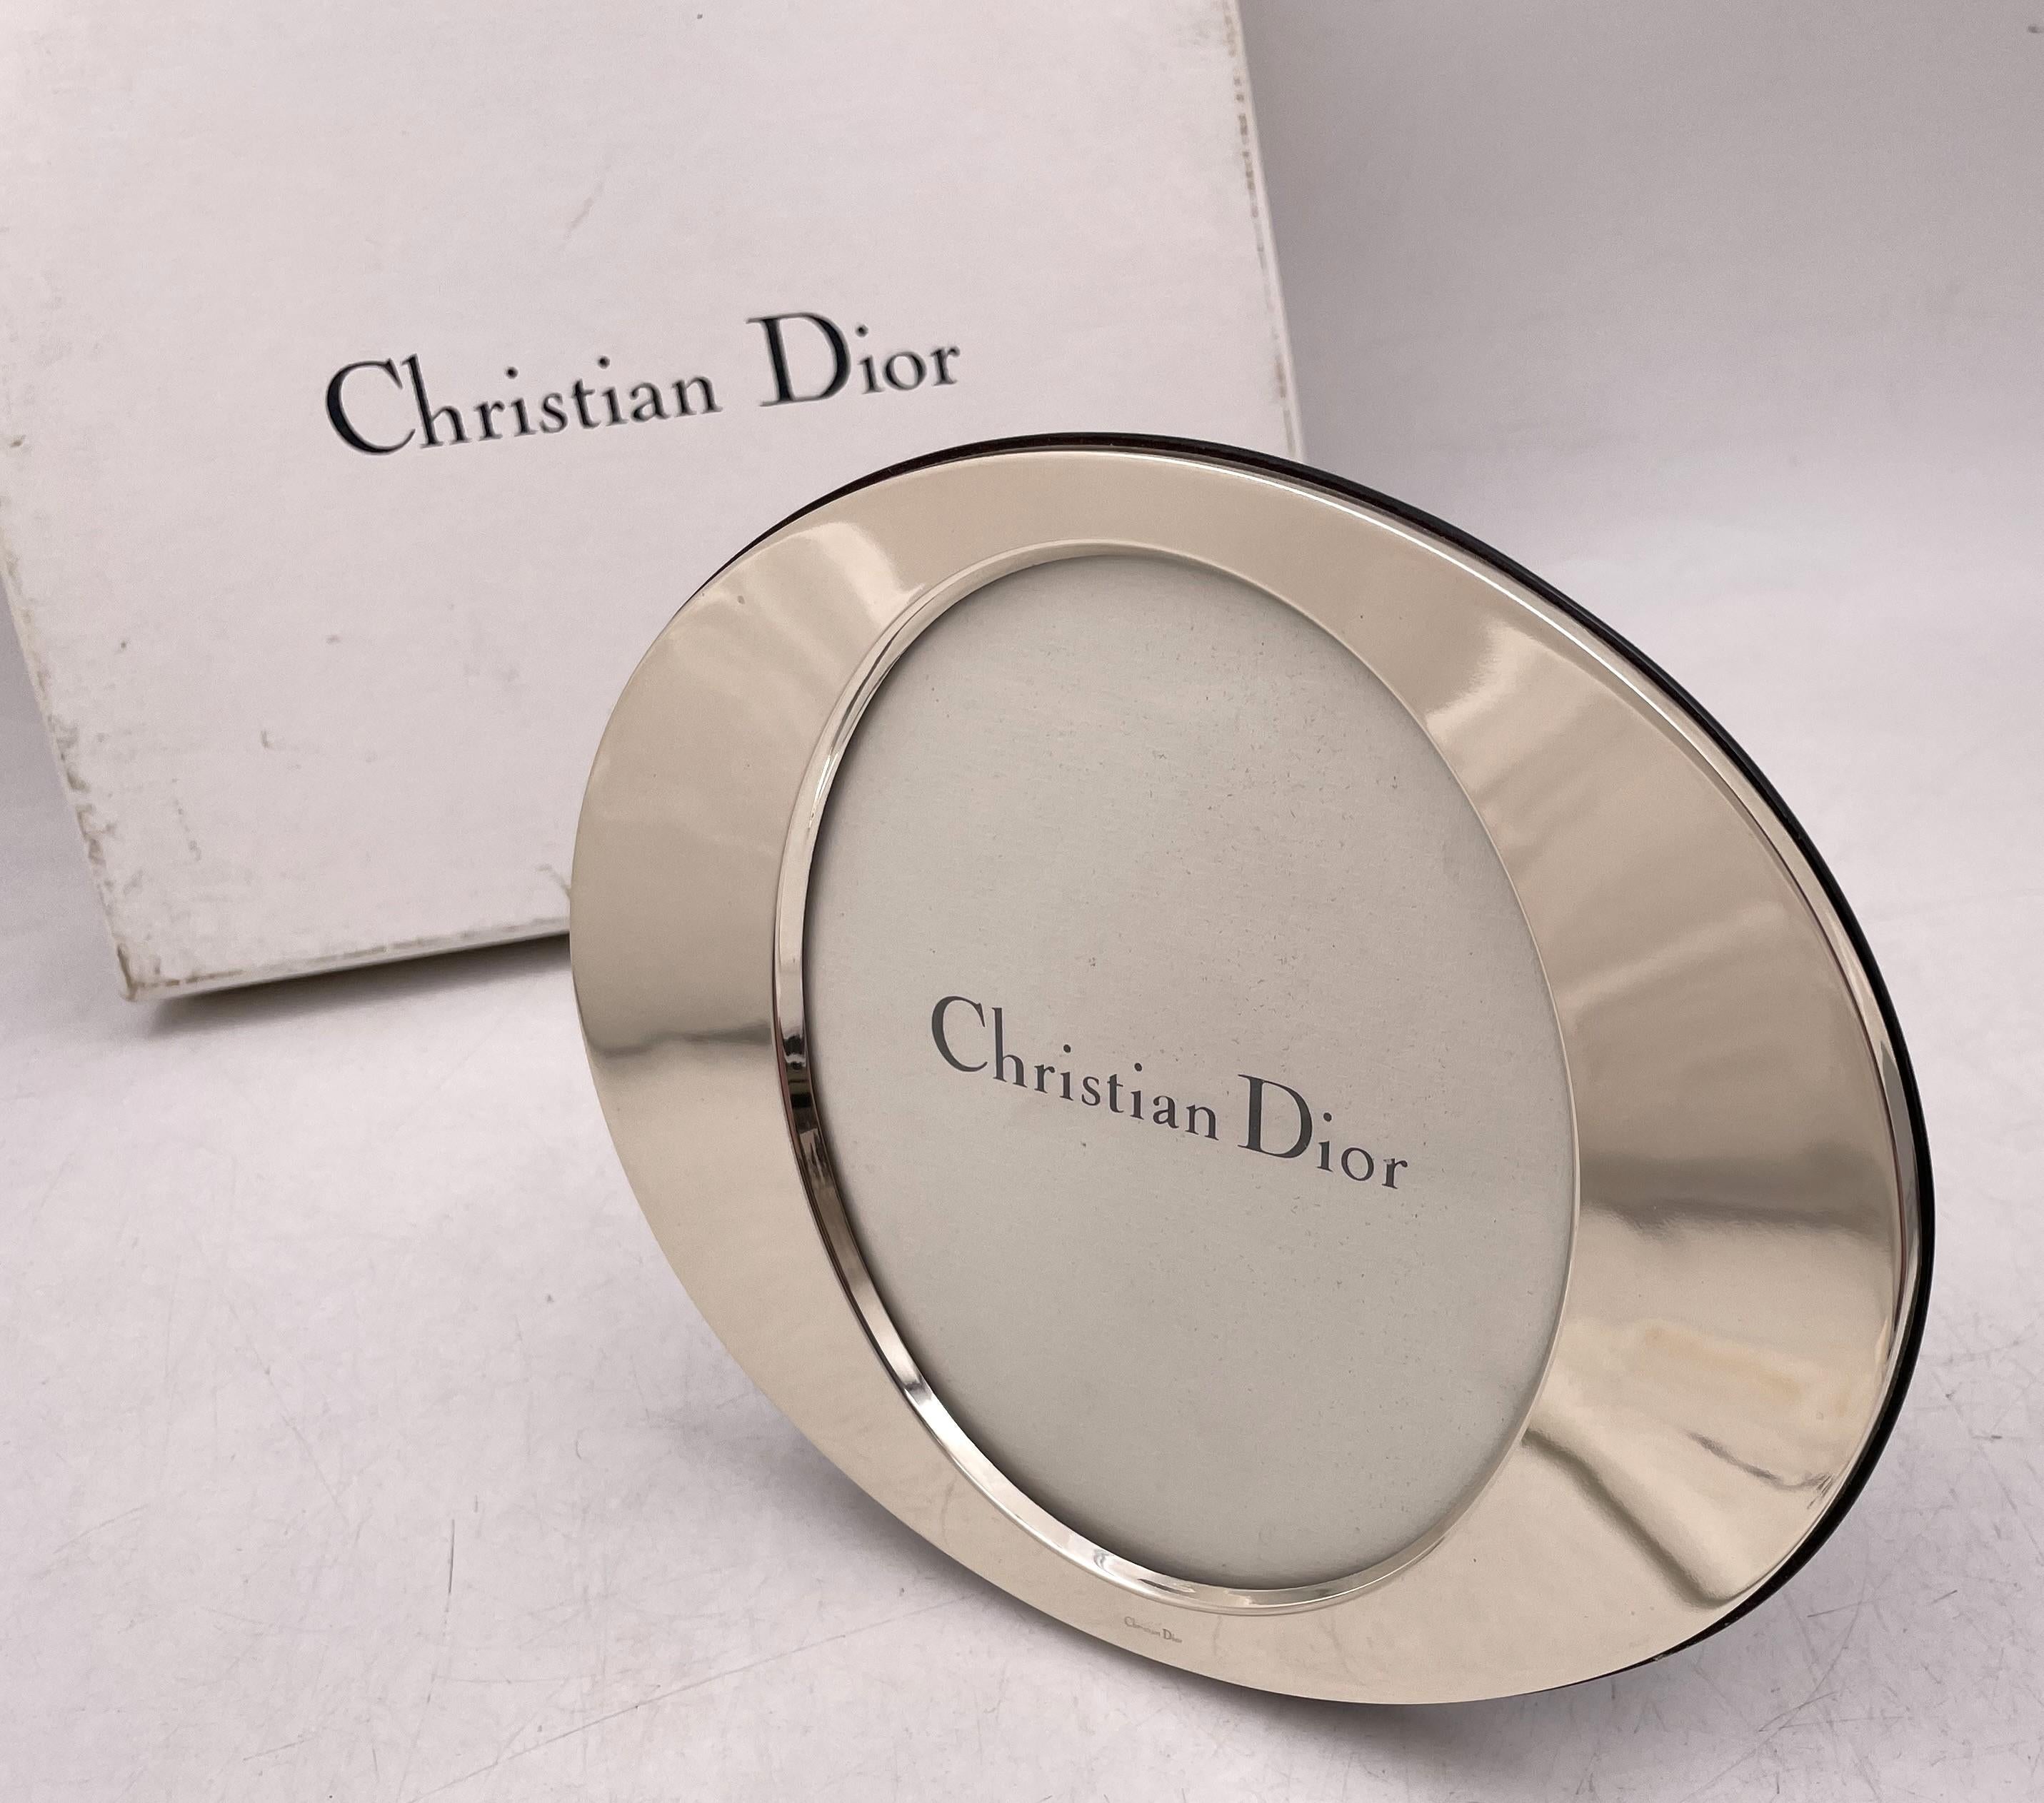 Christian Dior sterling silver picture frame in Mid-Century Modern style, made in Italy, and in oval shape. In new condition and sold with its original papers, pouch, and box, it has a wooden back, measures 8 1/4'' by 6 5/8'' (inner dimensions are 5